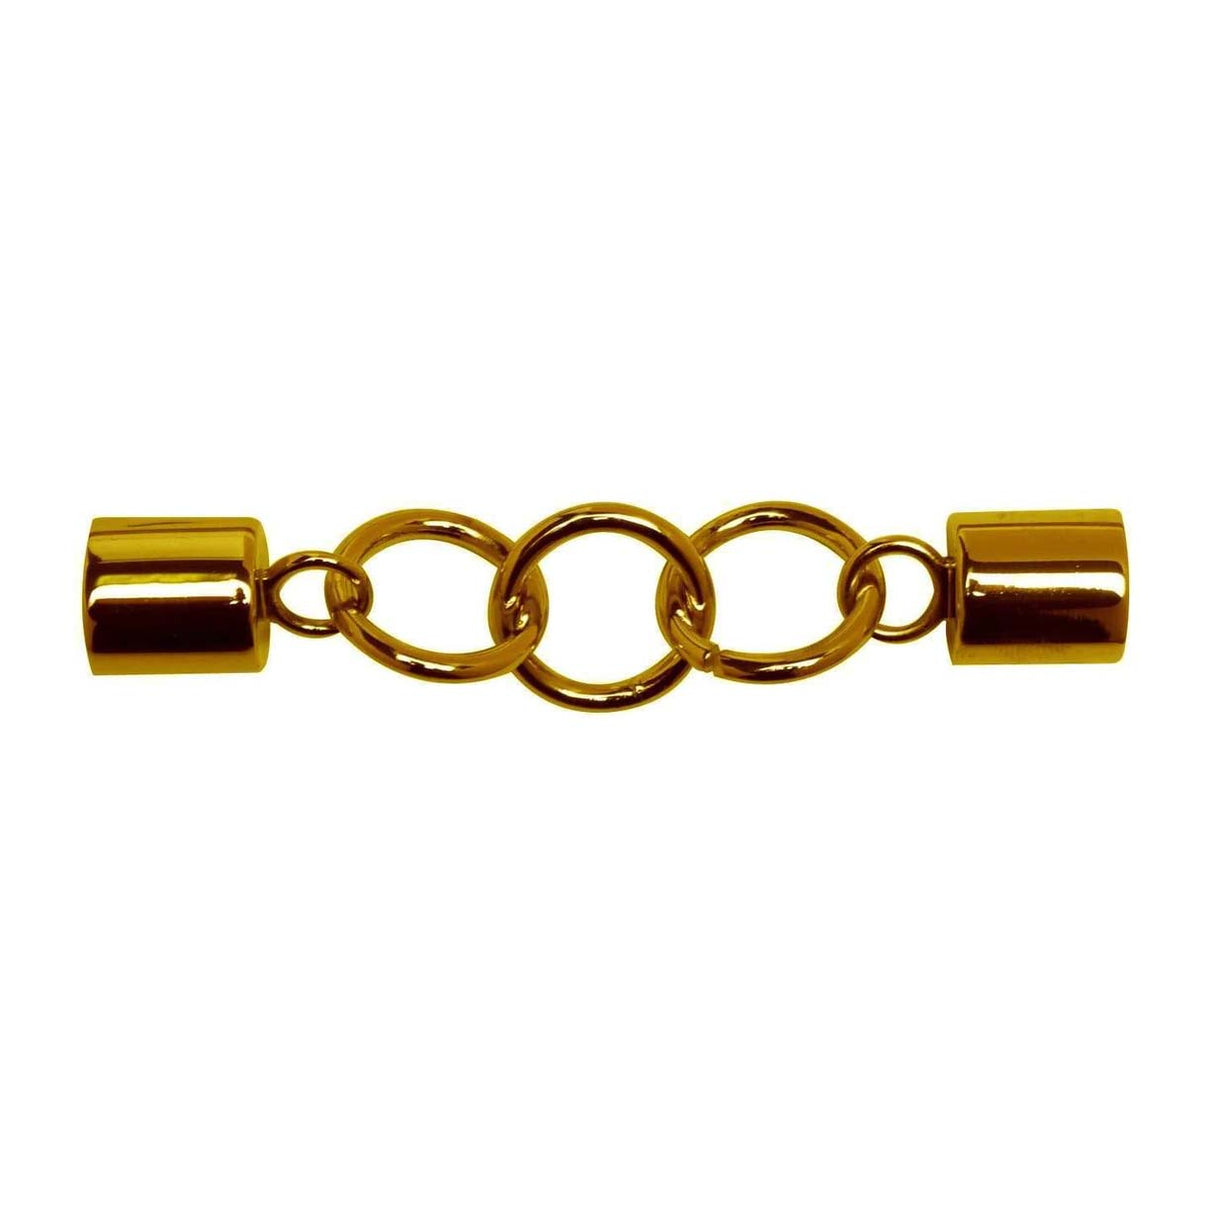 1/2" Shiny Gold, Chain Handle Loop With Caps, #P-2749-GOLD